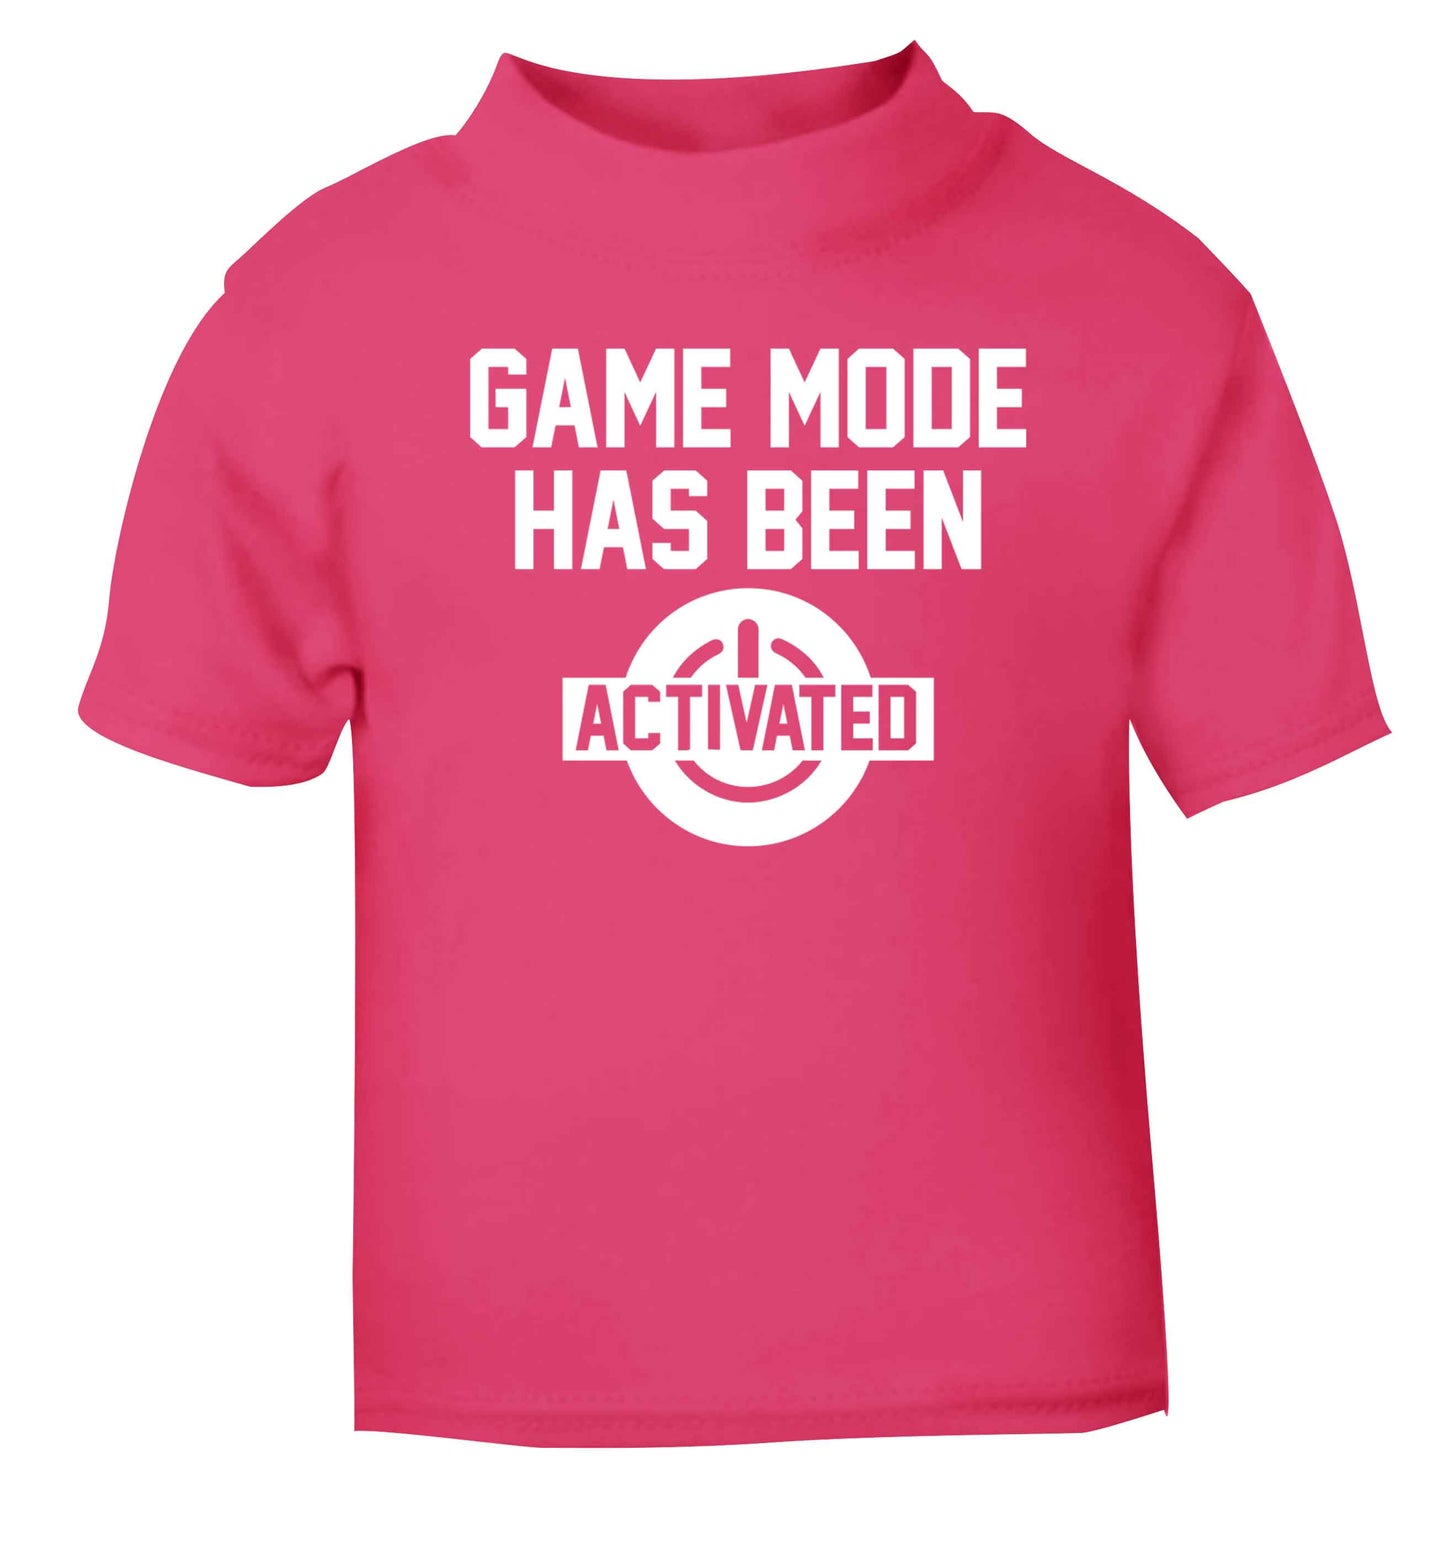 Game mode has been activated pink baby toddler Tshirt 2 Years